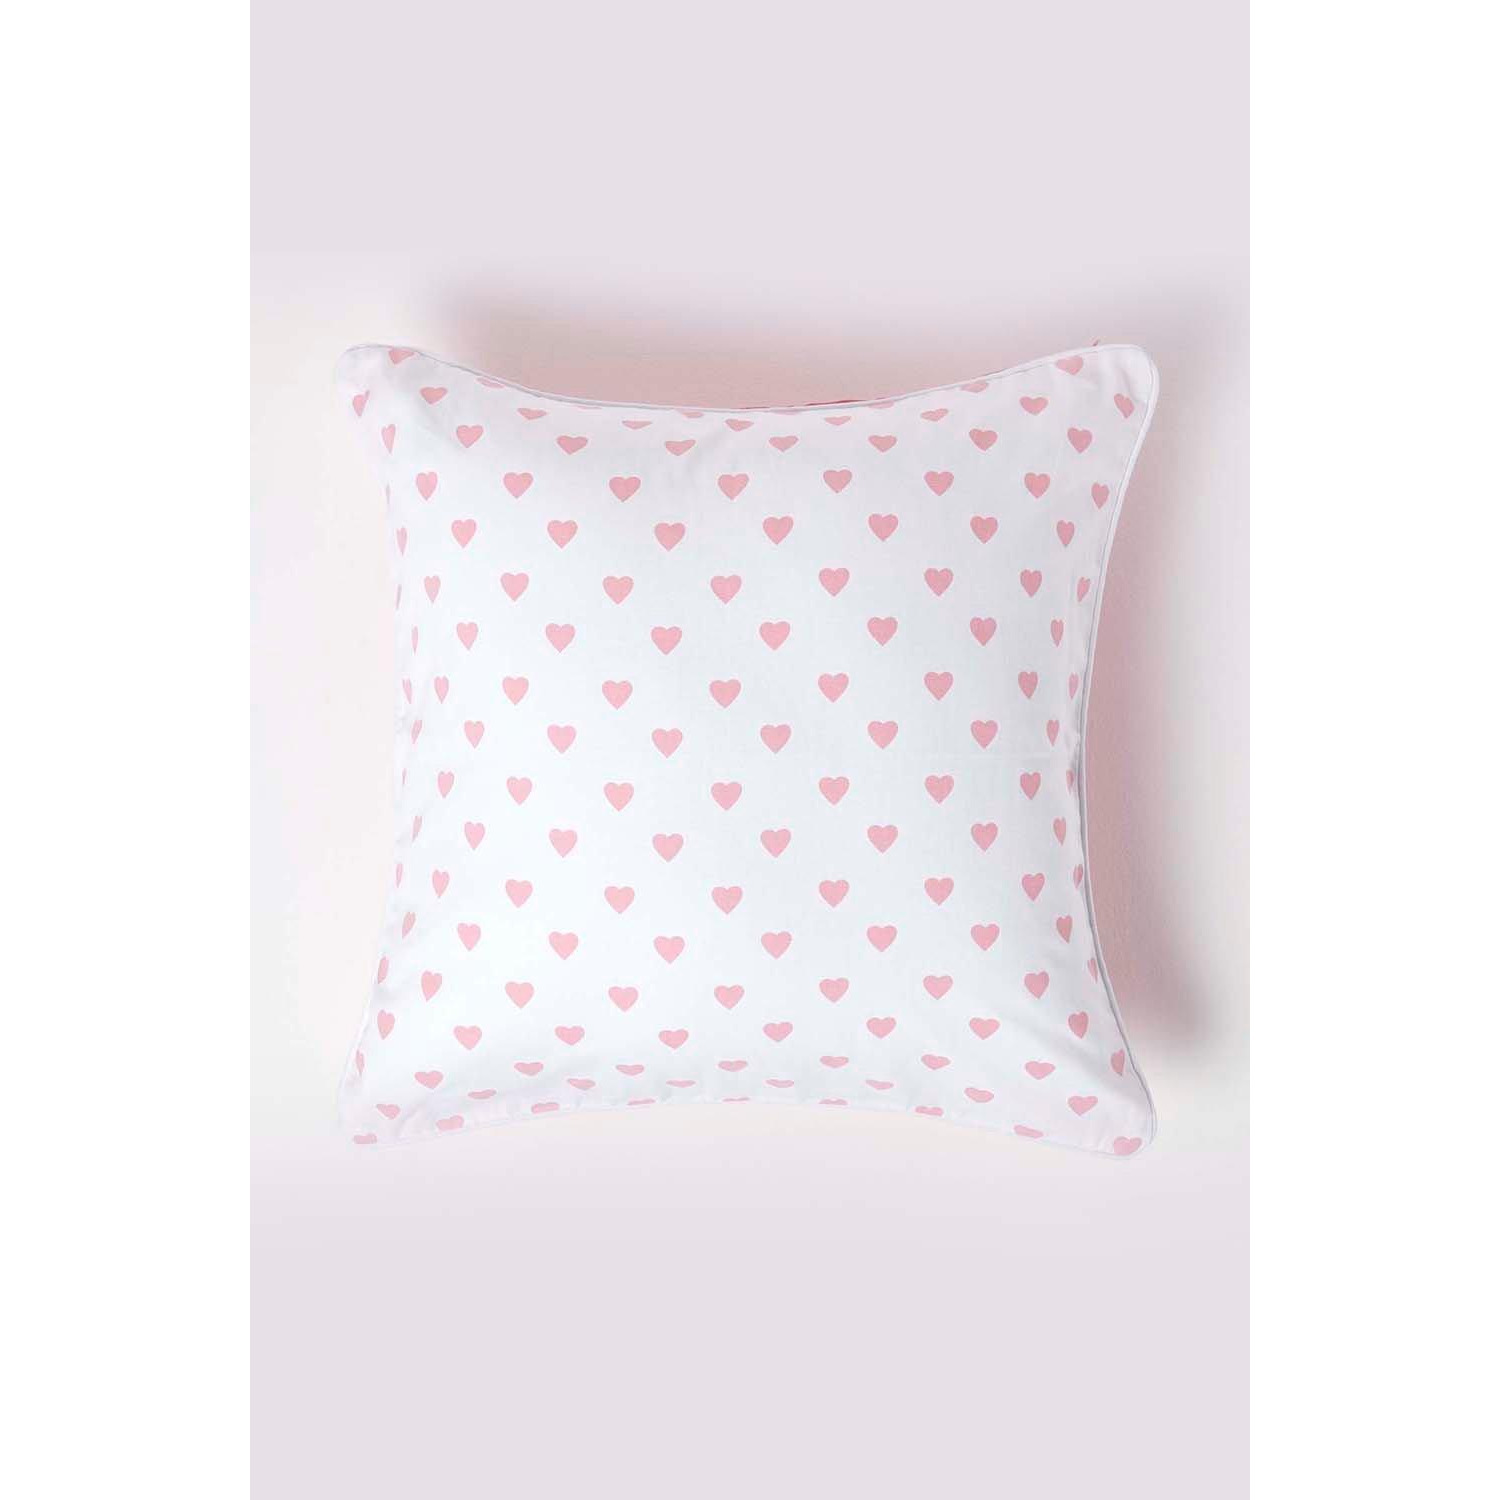 Cotton Hearts Cushion Cover - image 1